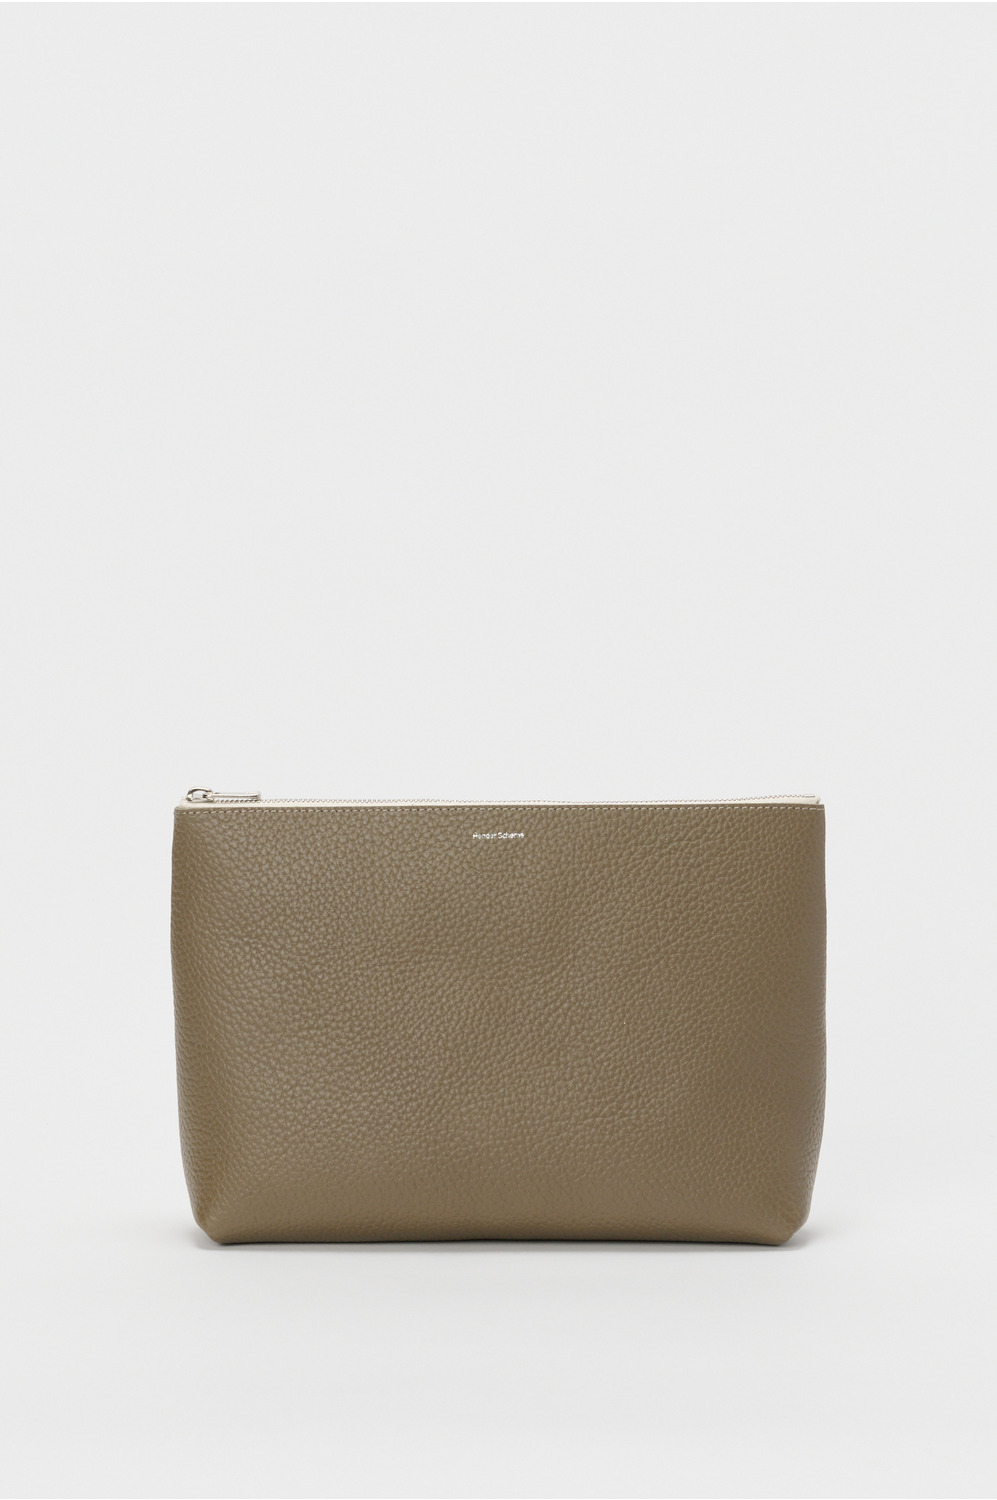 pouch L 詳細画像 taupe 1